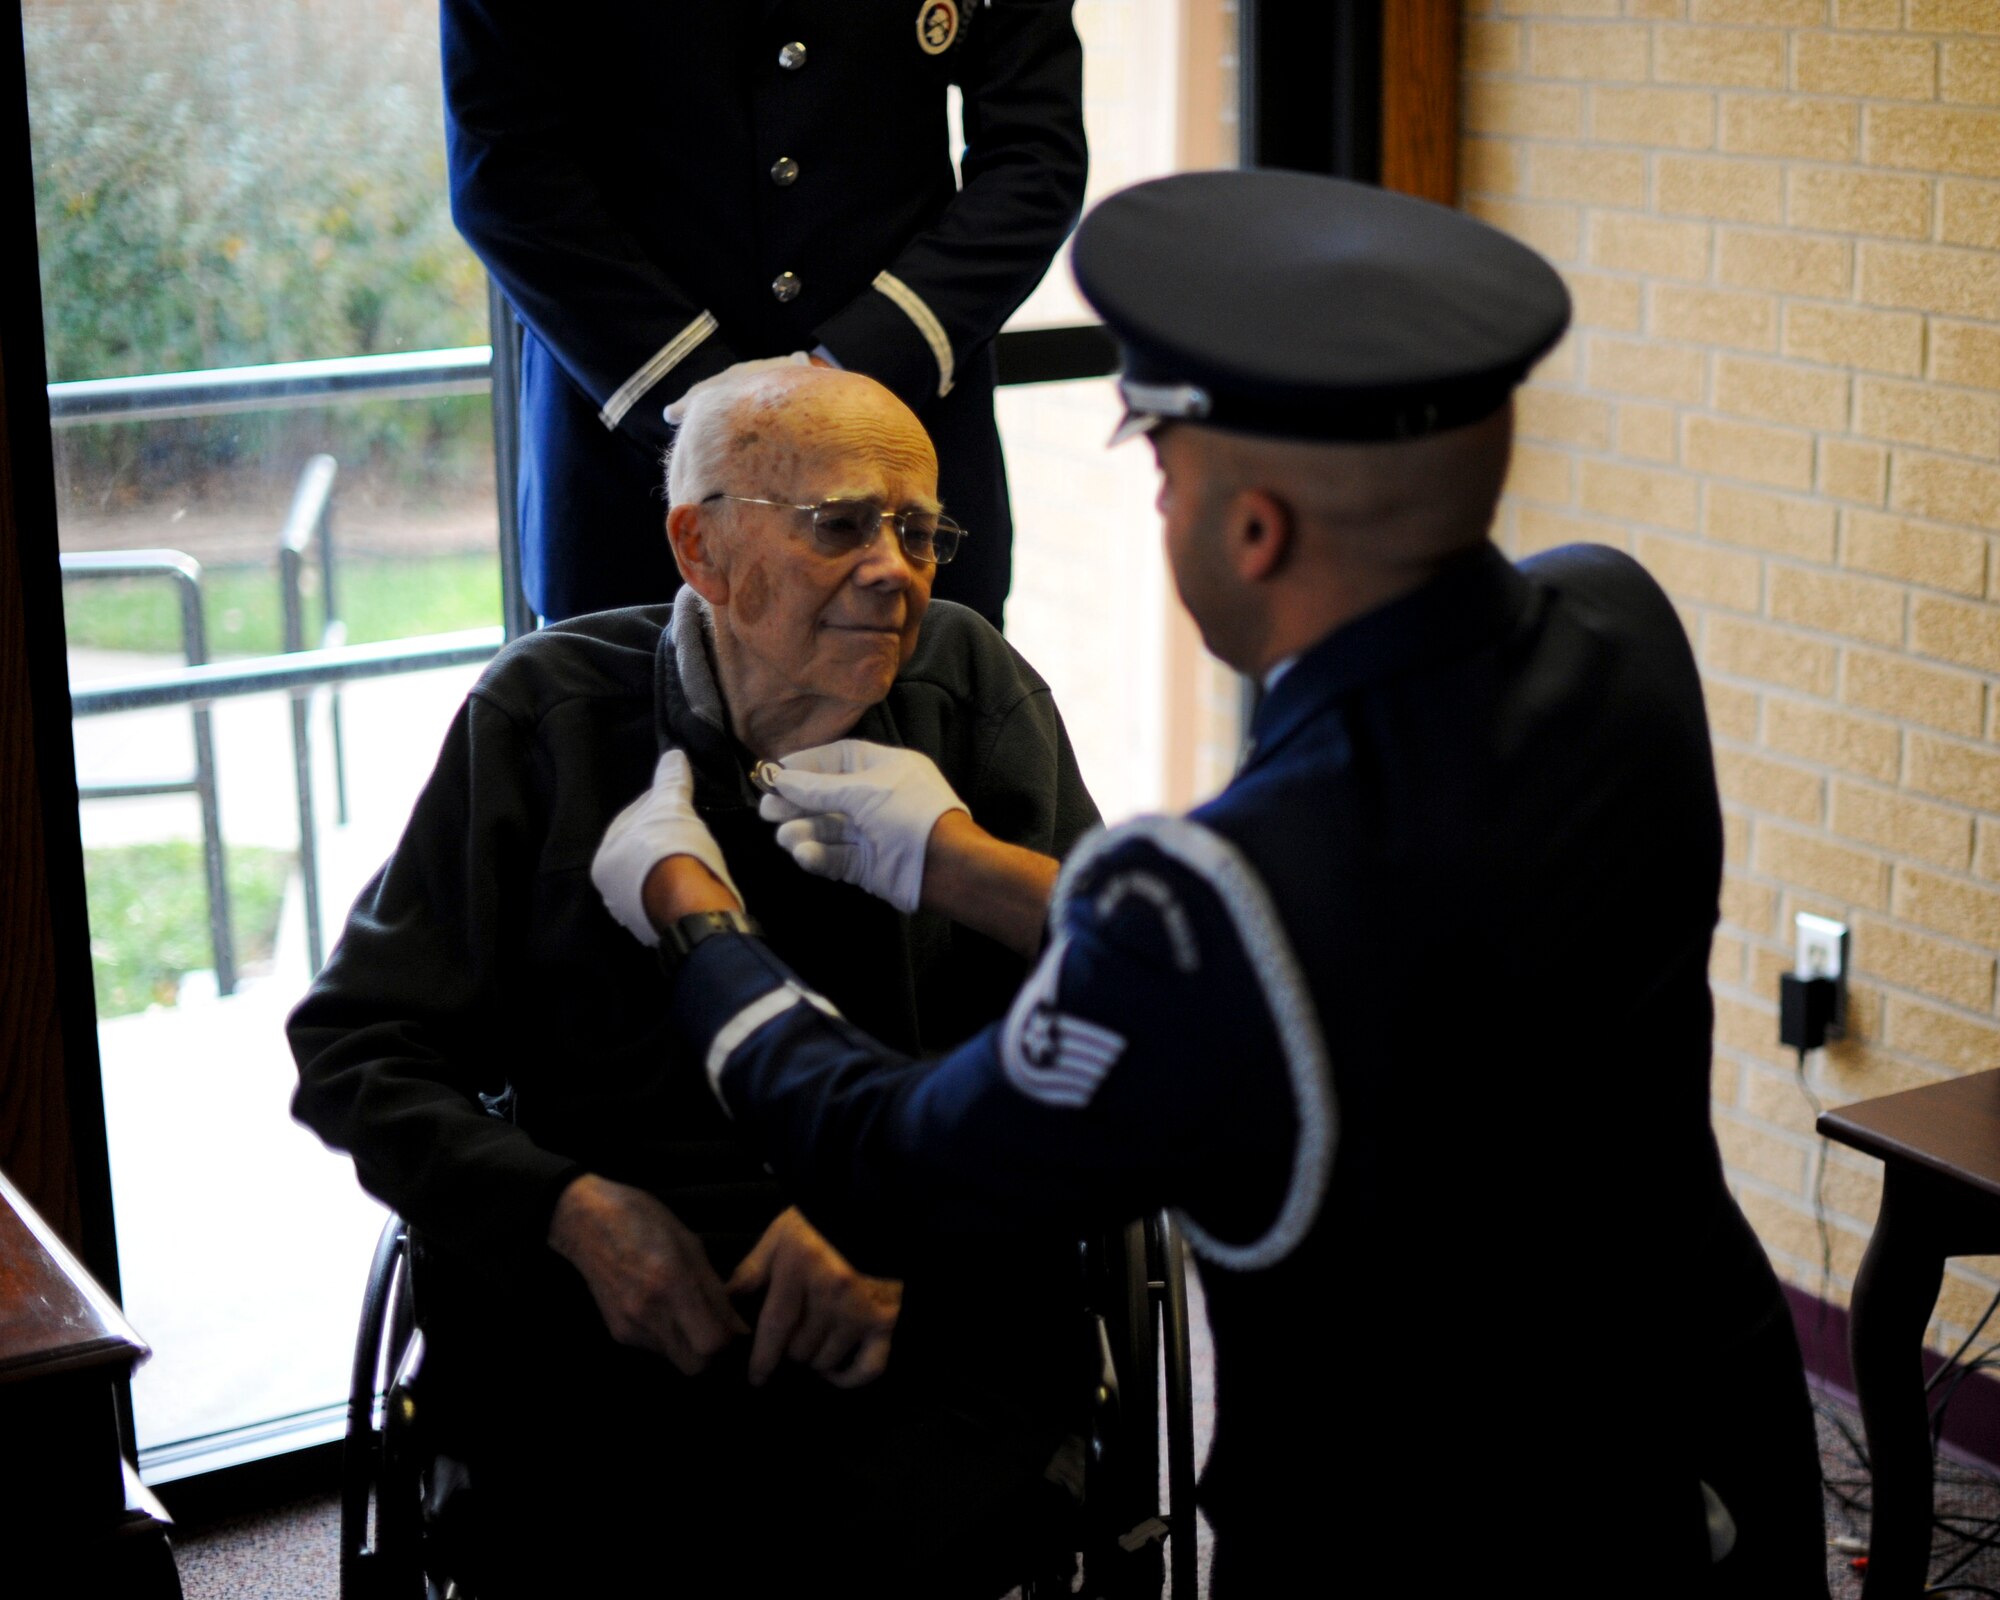 Tech. Sgt. Terrance Williams, 22nd Air Refueling Wing Honor Guard NCO in charge, places a veteran’s pin on the collar of Roy Mullinax, a World War II veteran, Dec. 8, 2015, in Newton, Kan. Mullinax enlisted in the Army towards the end of World War II before joining the Air Force and working for the federal government for more than 50 years before his retirement in 2004. (U.S. Air Force photo/Senior Airman Victor J. Caputo)